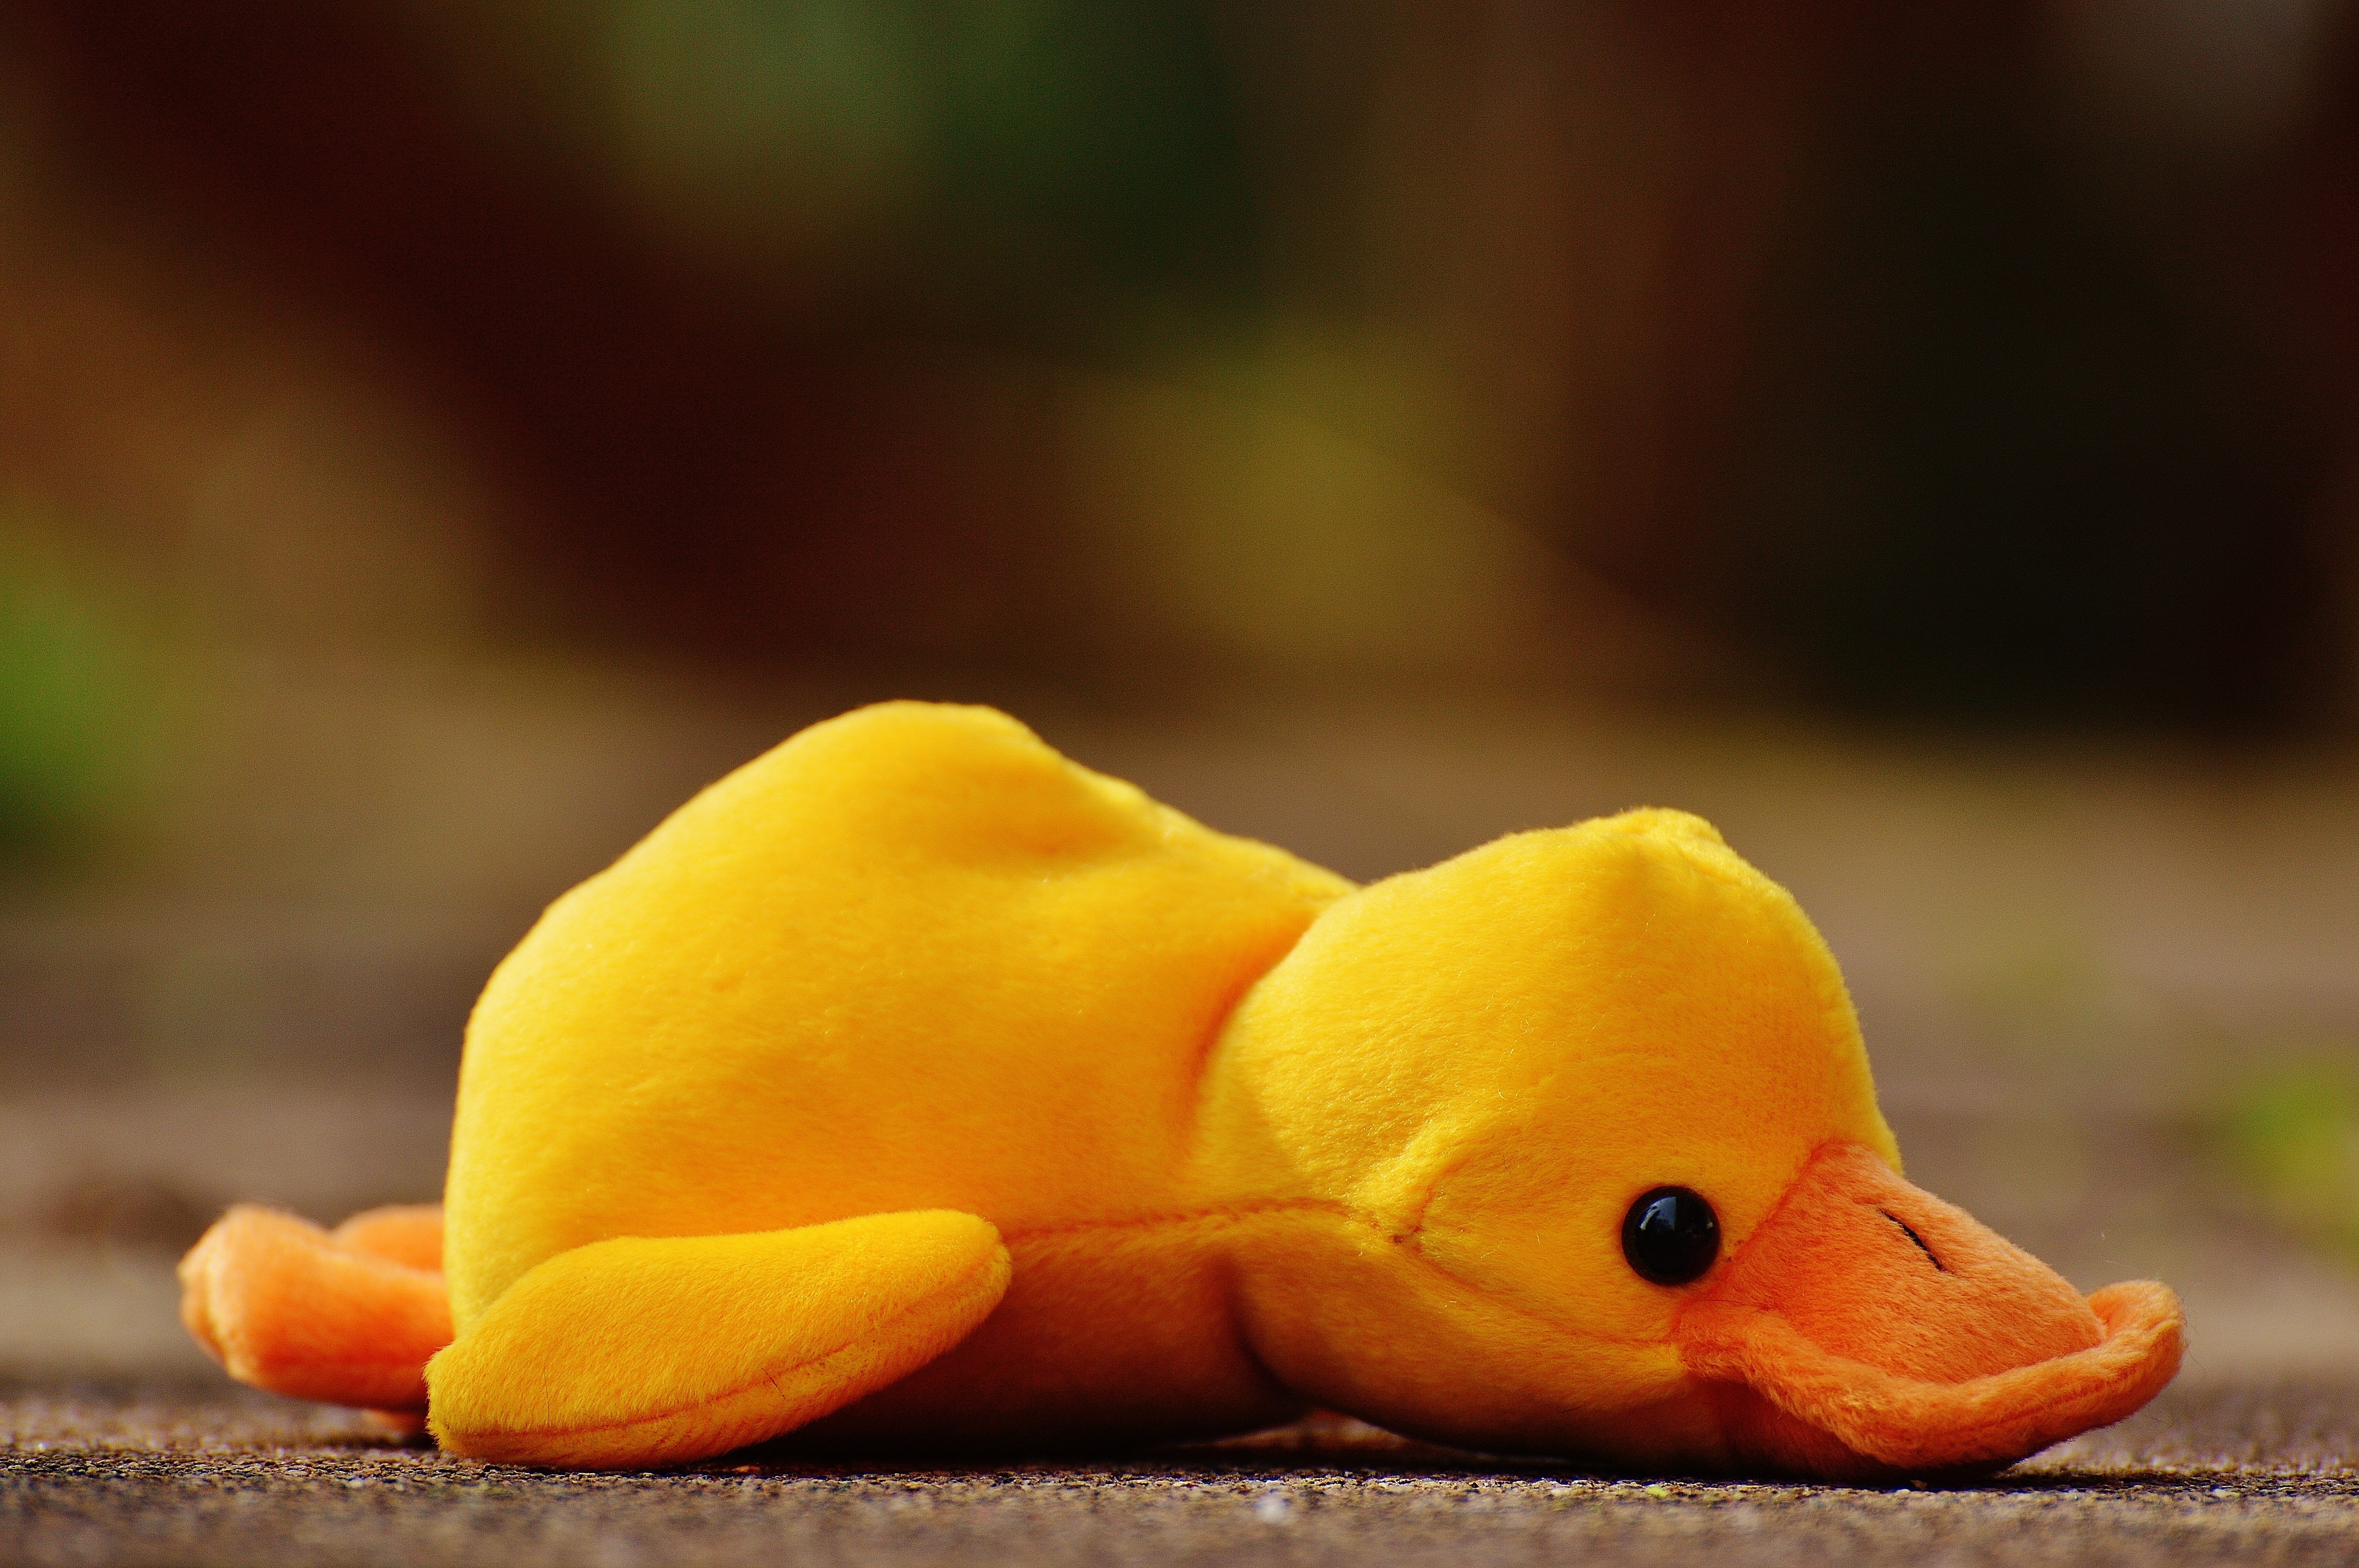 Soft Toy, Funny, Children, Toys, Duck, one animal, yellow